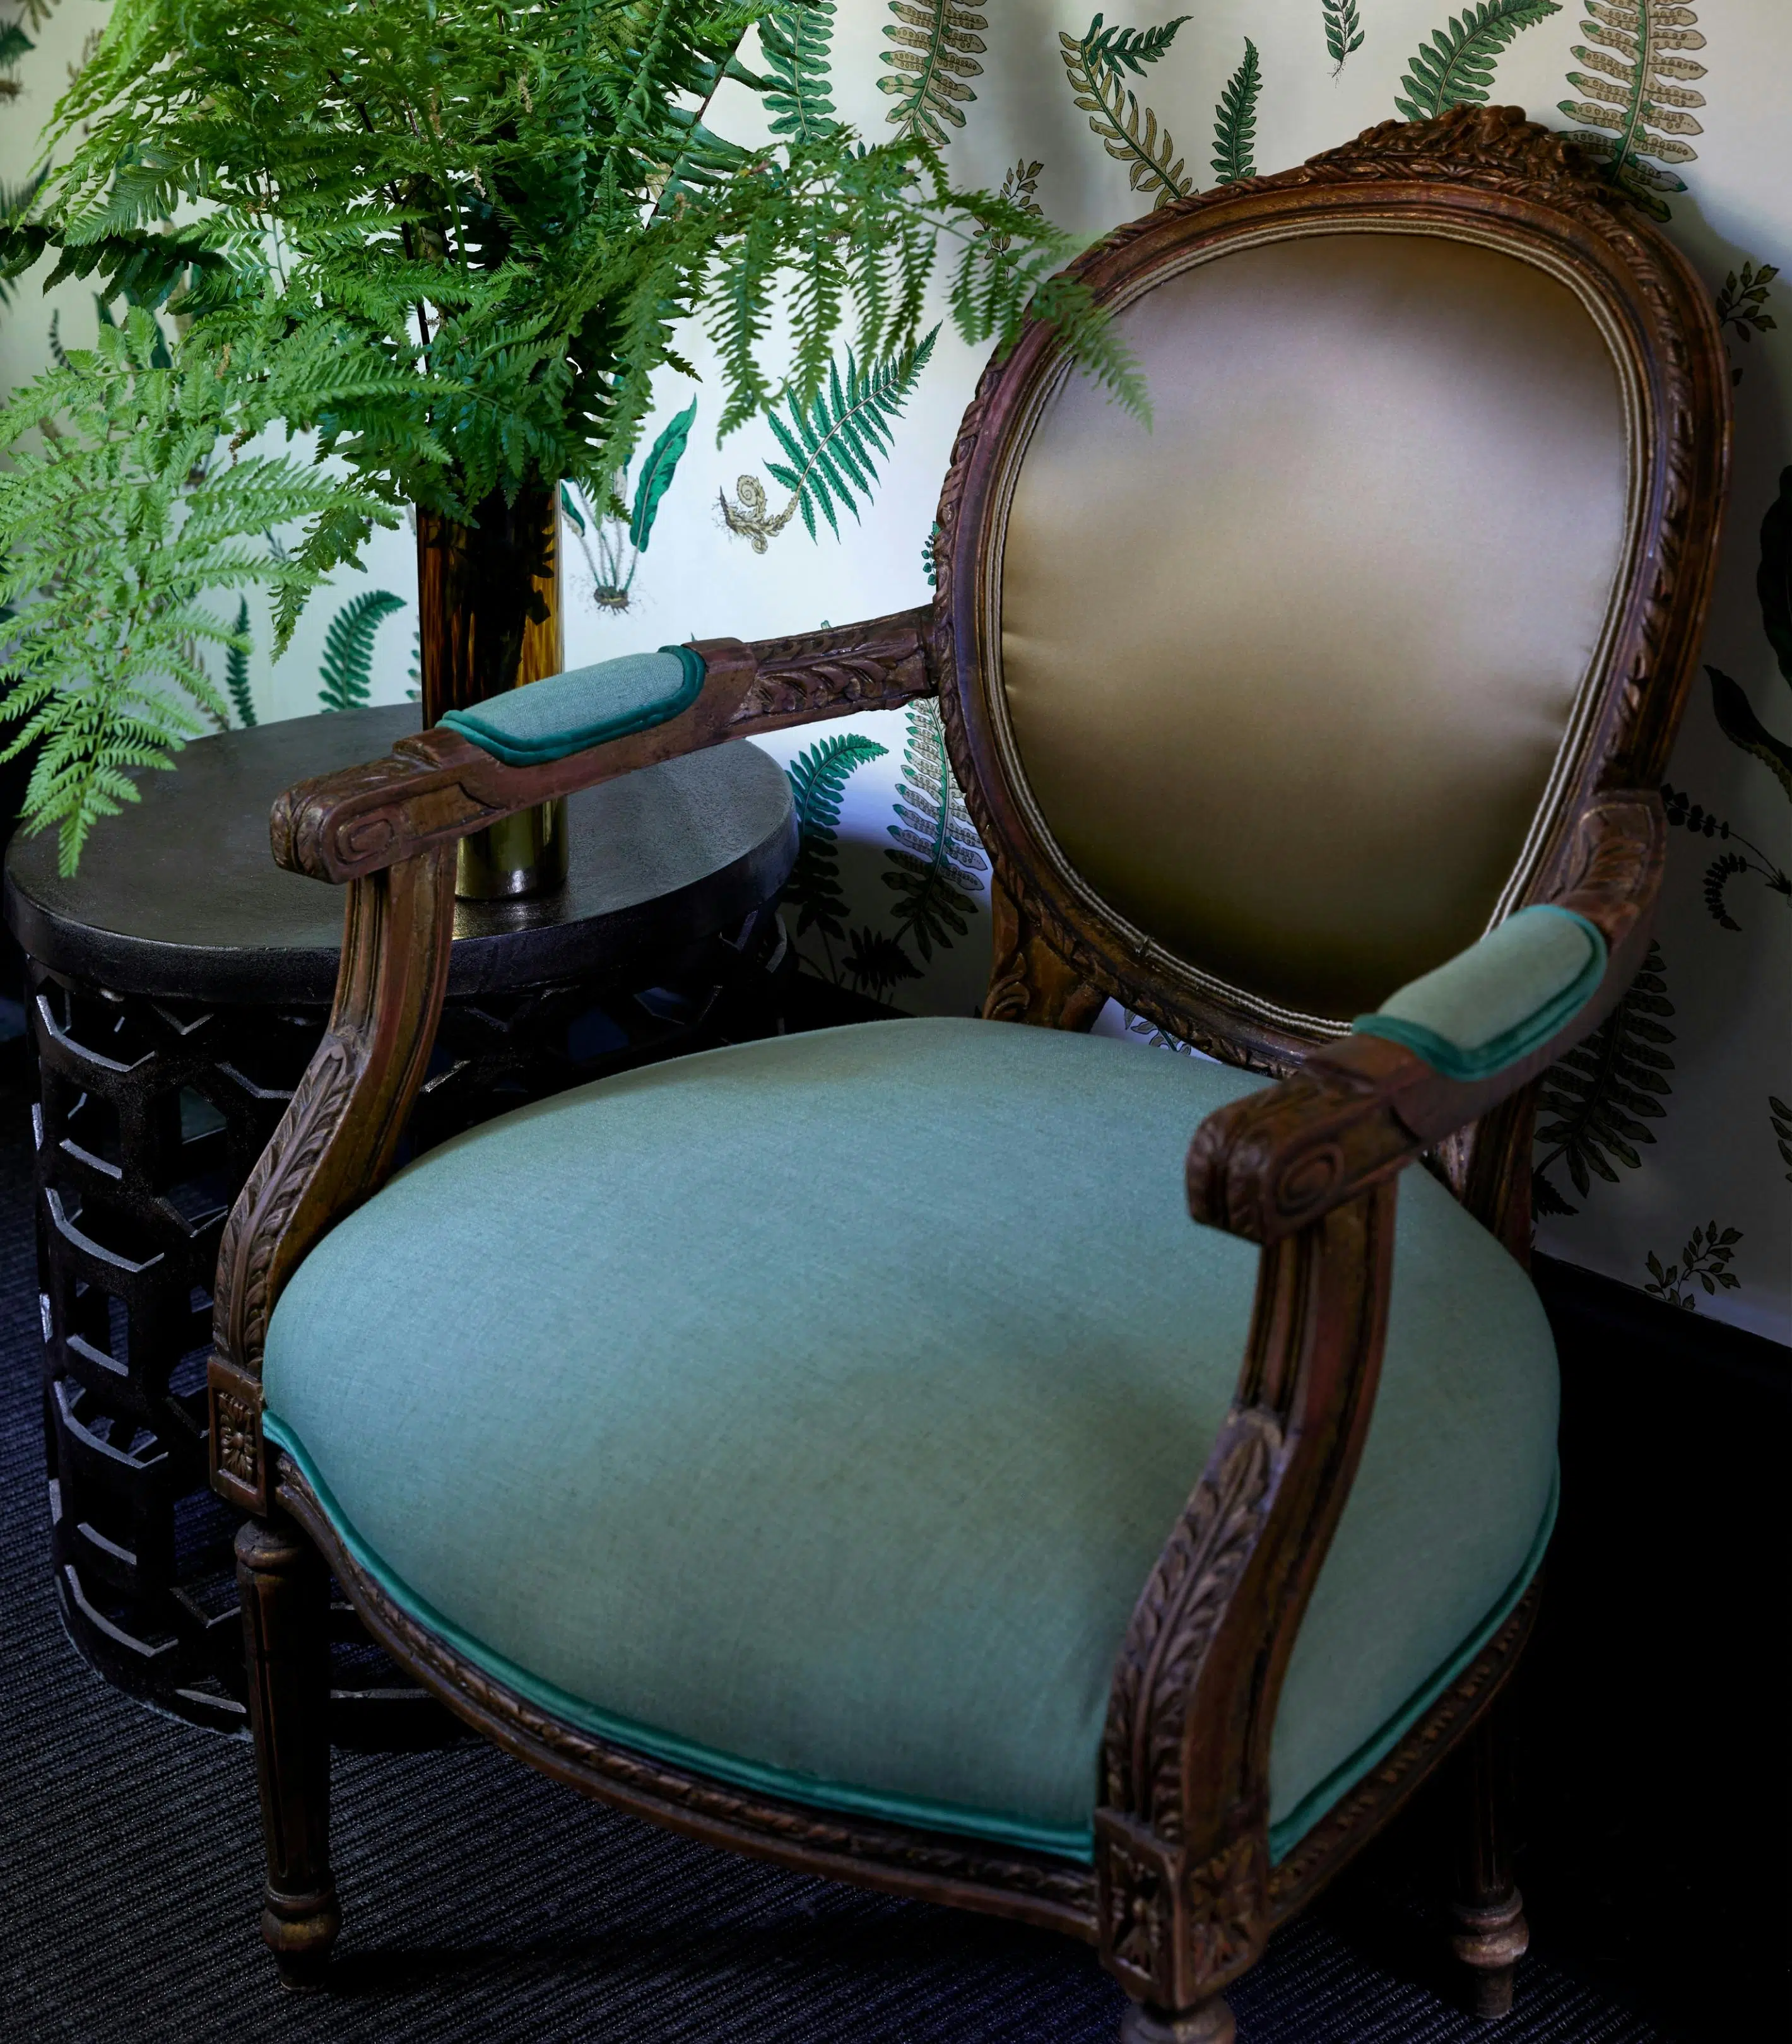 A Louis XV-style chair with a dark wooden frame has its back upholstered in a glossy, brown fabric while its seat and arm rests are upholstered in a colour close to duck egg blue. Wallpaper behind it is illustrated with ferns, and a vase of ferns sits beside it on a side table